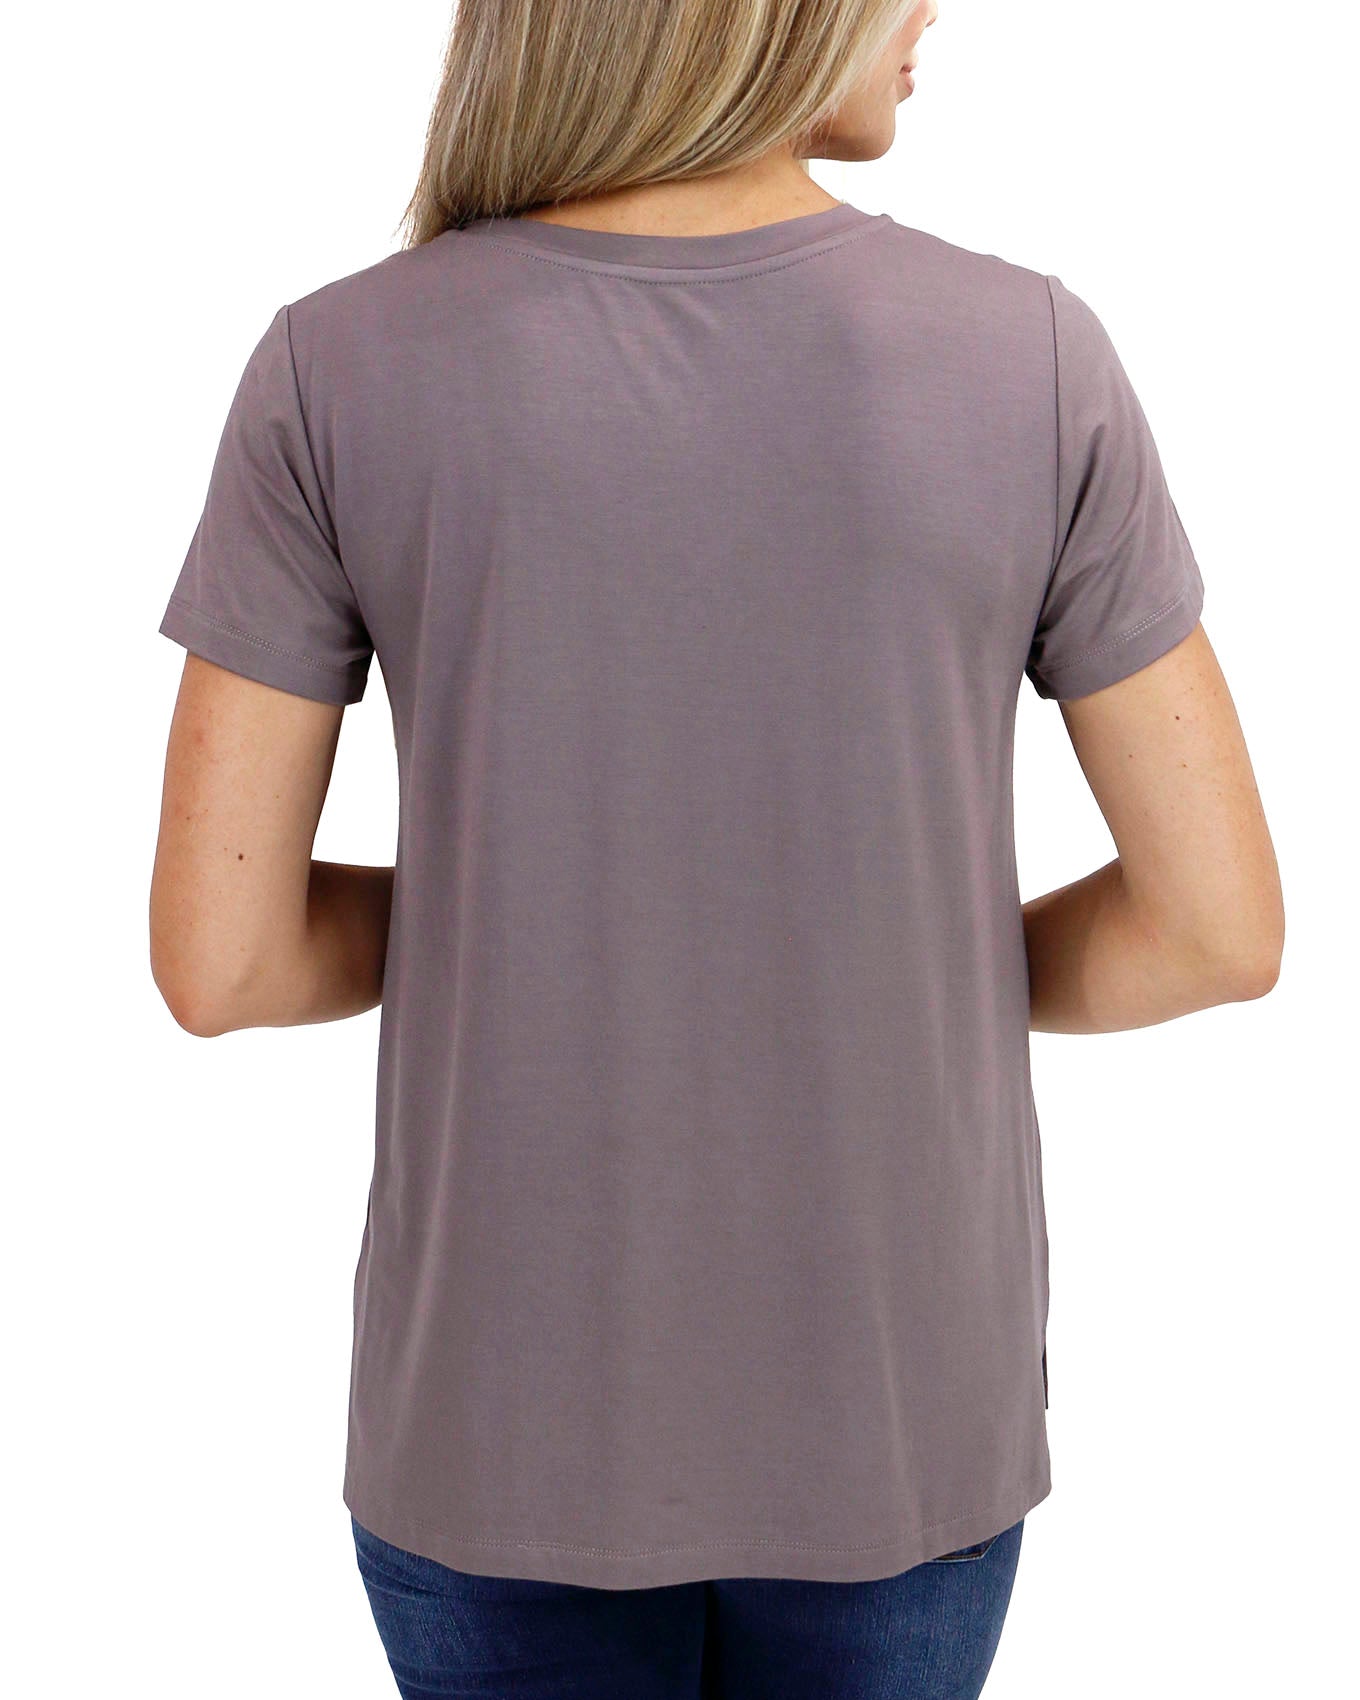 VIP Favorite Perfect Thistle V-Neck Tee